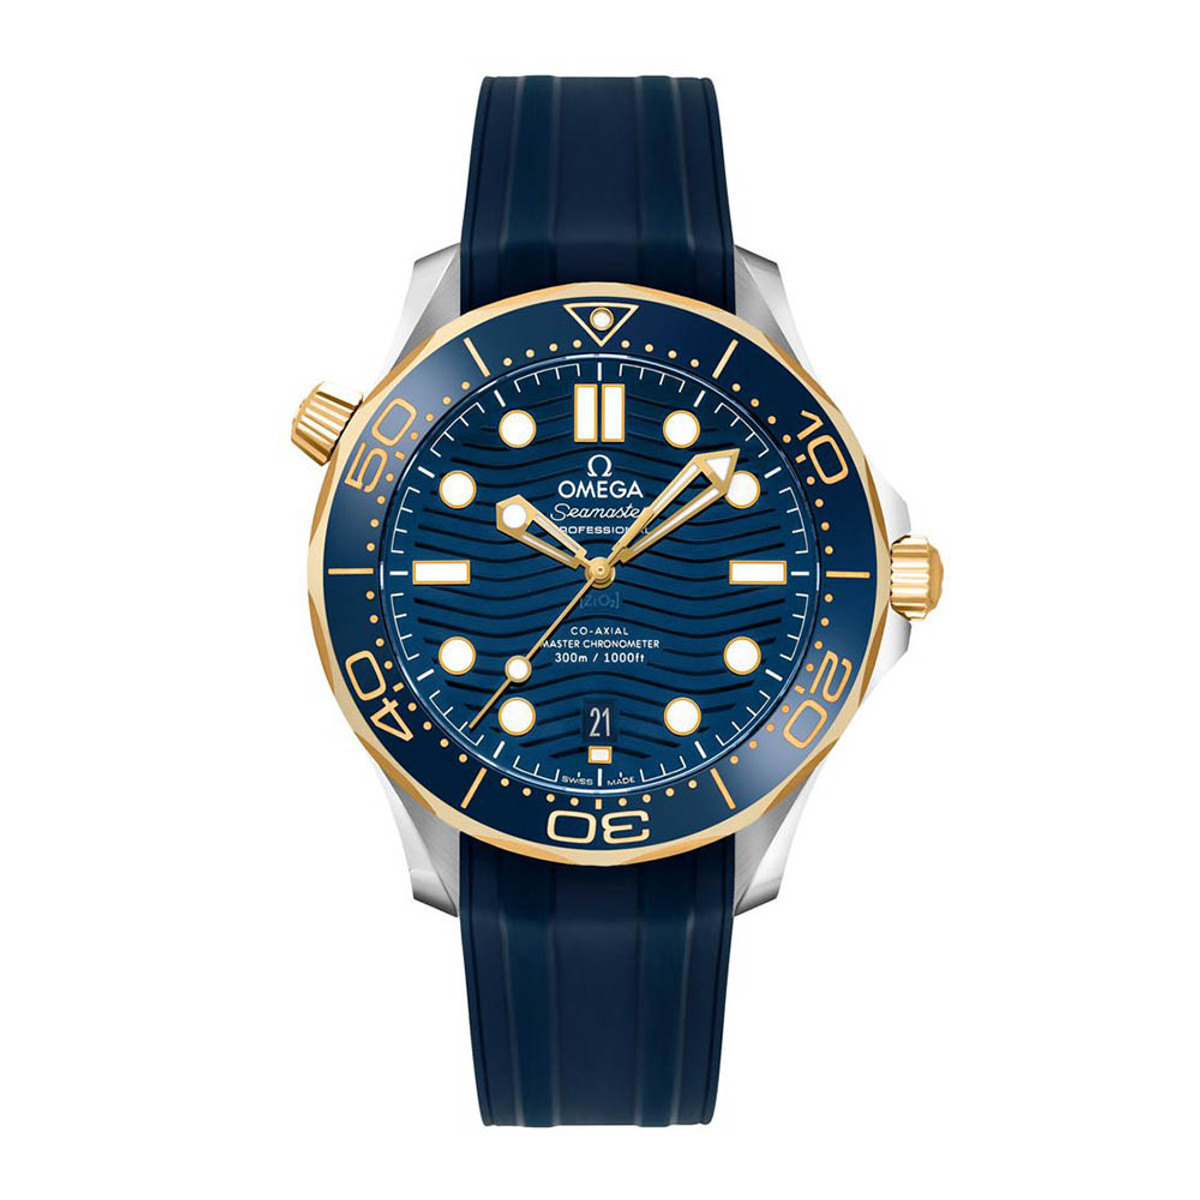 Omega Seamaster Diver 300M 18K Yellow Gold & Steel 42mm 210.22.42.20.03.001-WOMG0808 Product Image